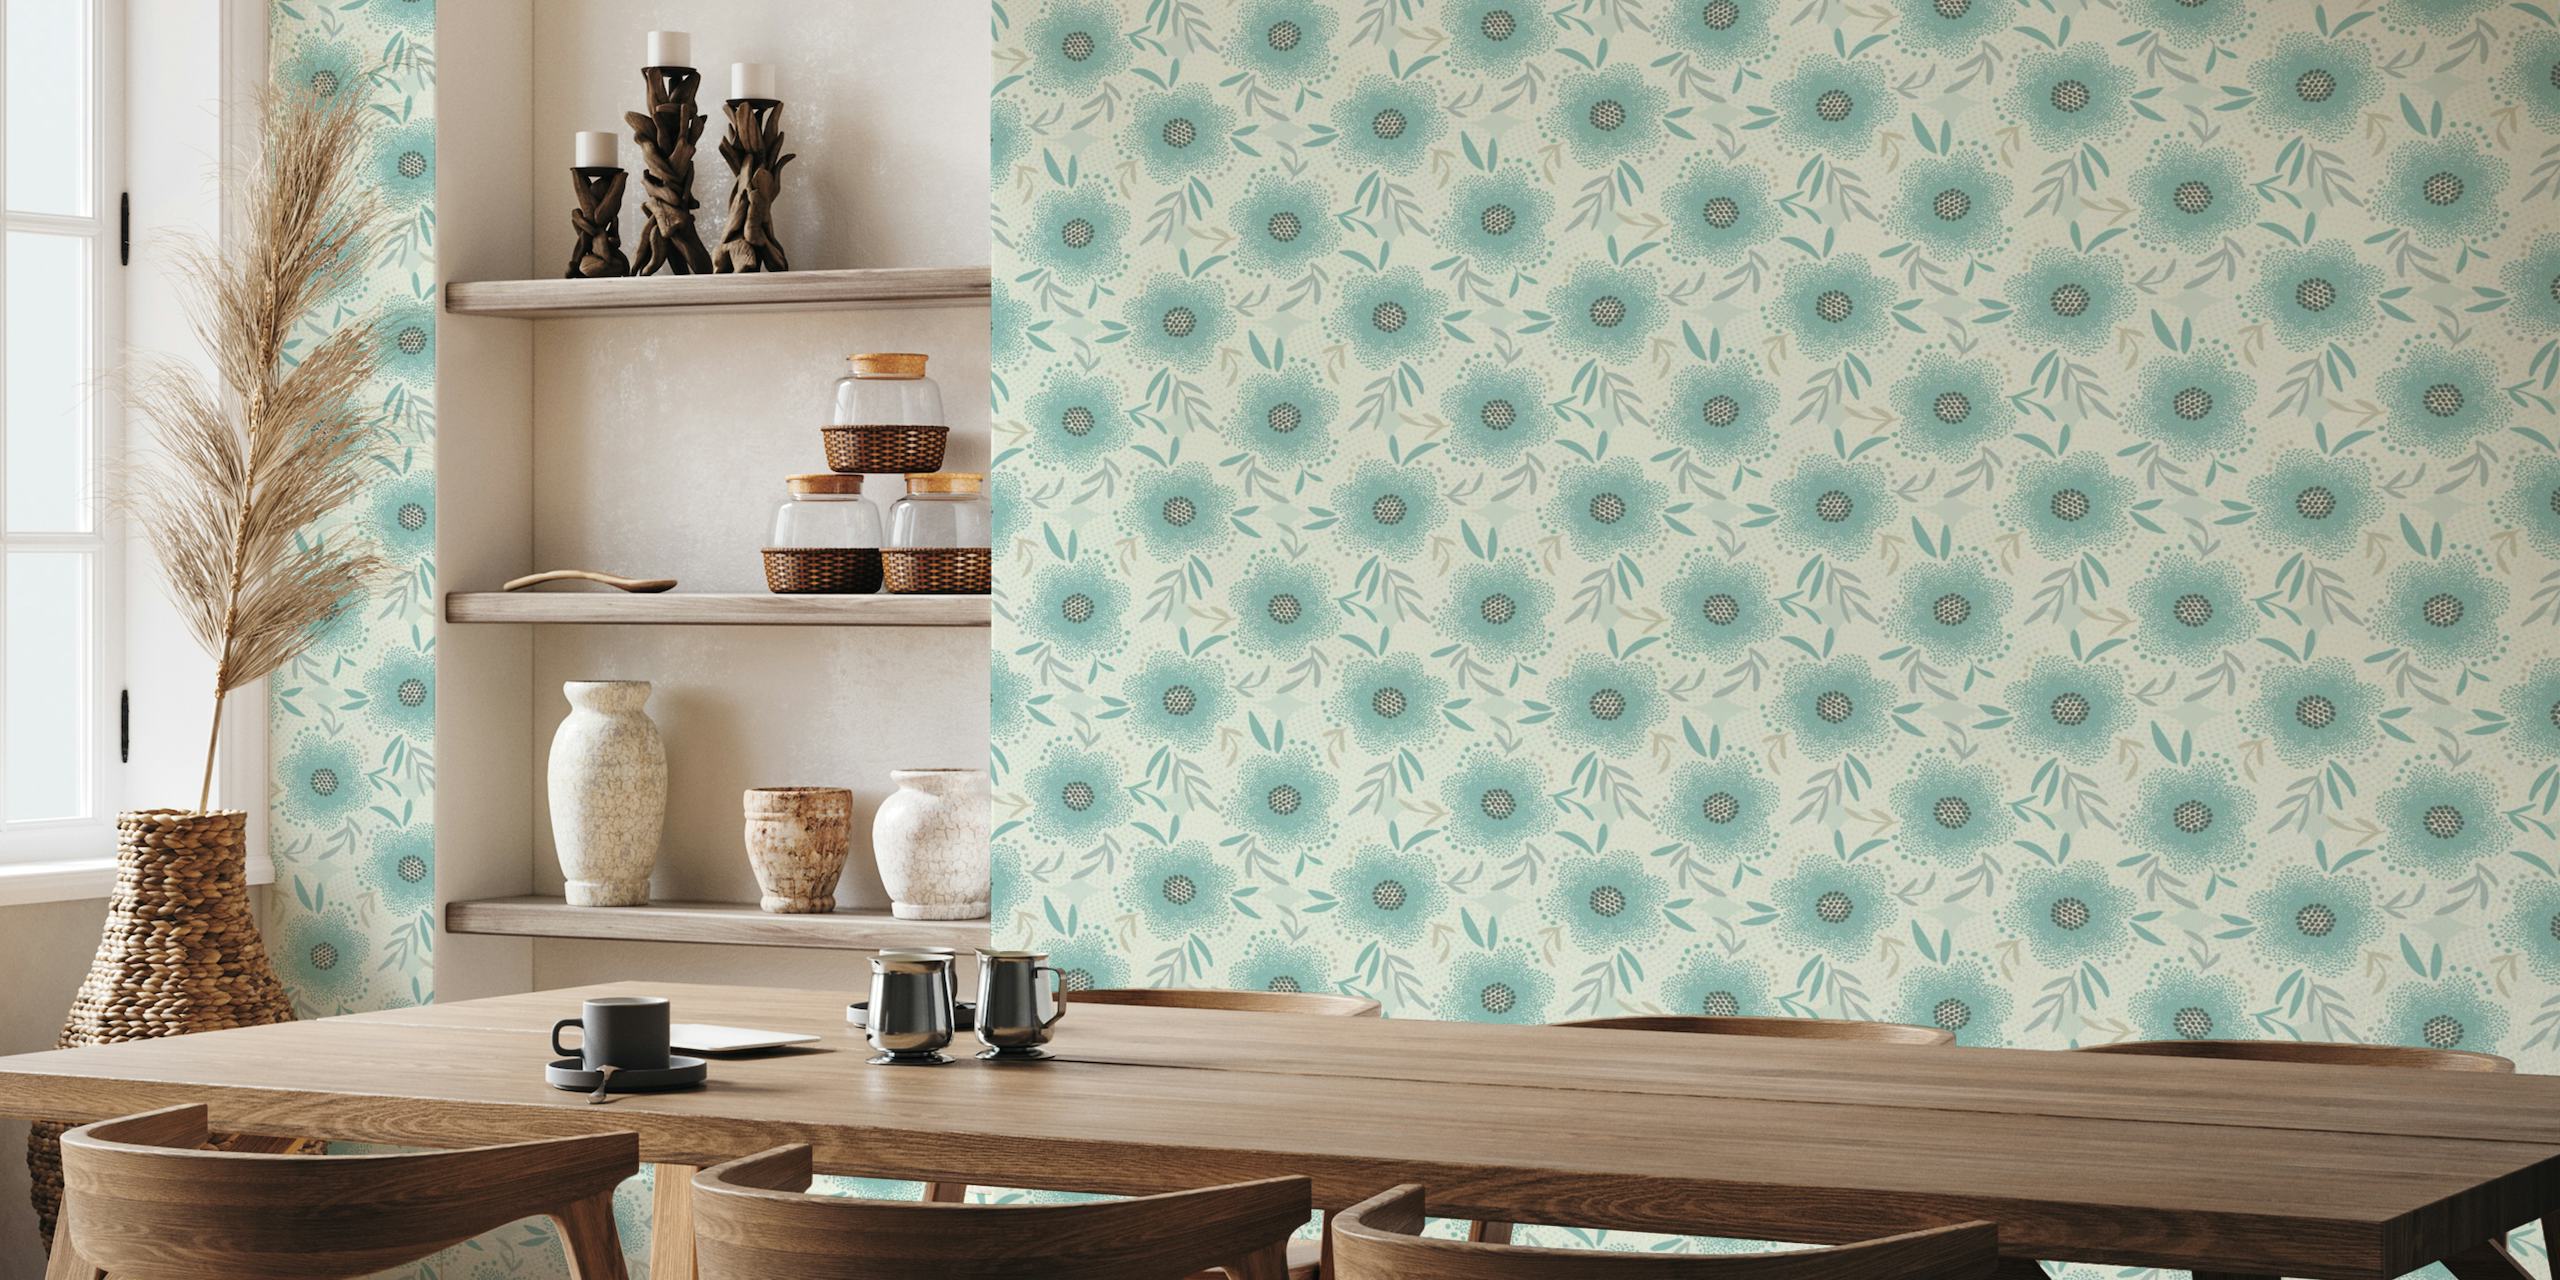 Calm vintage floral pattern wall mural in muted tones